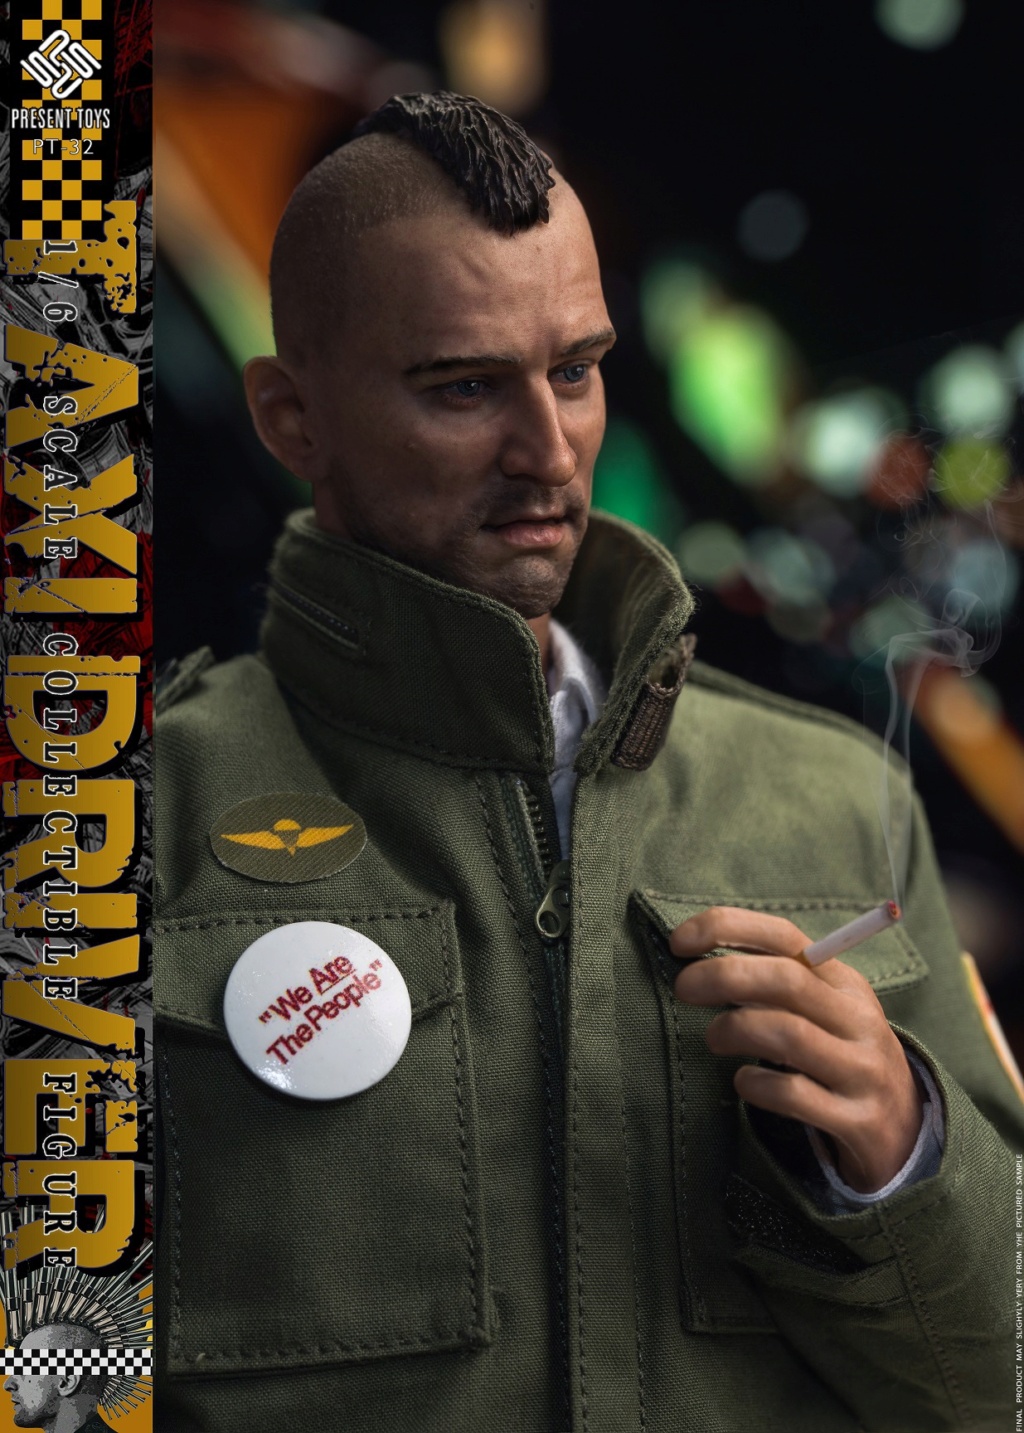 NEW PRODUCT: Present Toys: 1/6 "Taxi Driver" Collection Doll#PT-sp32 18192510